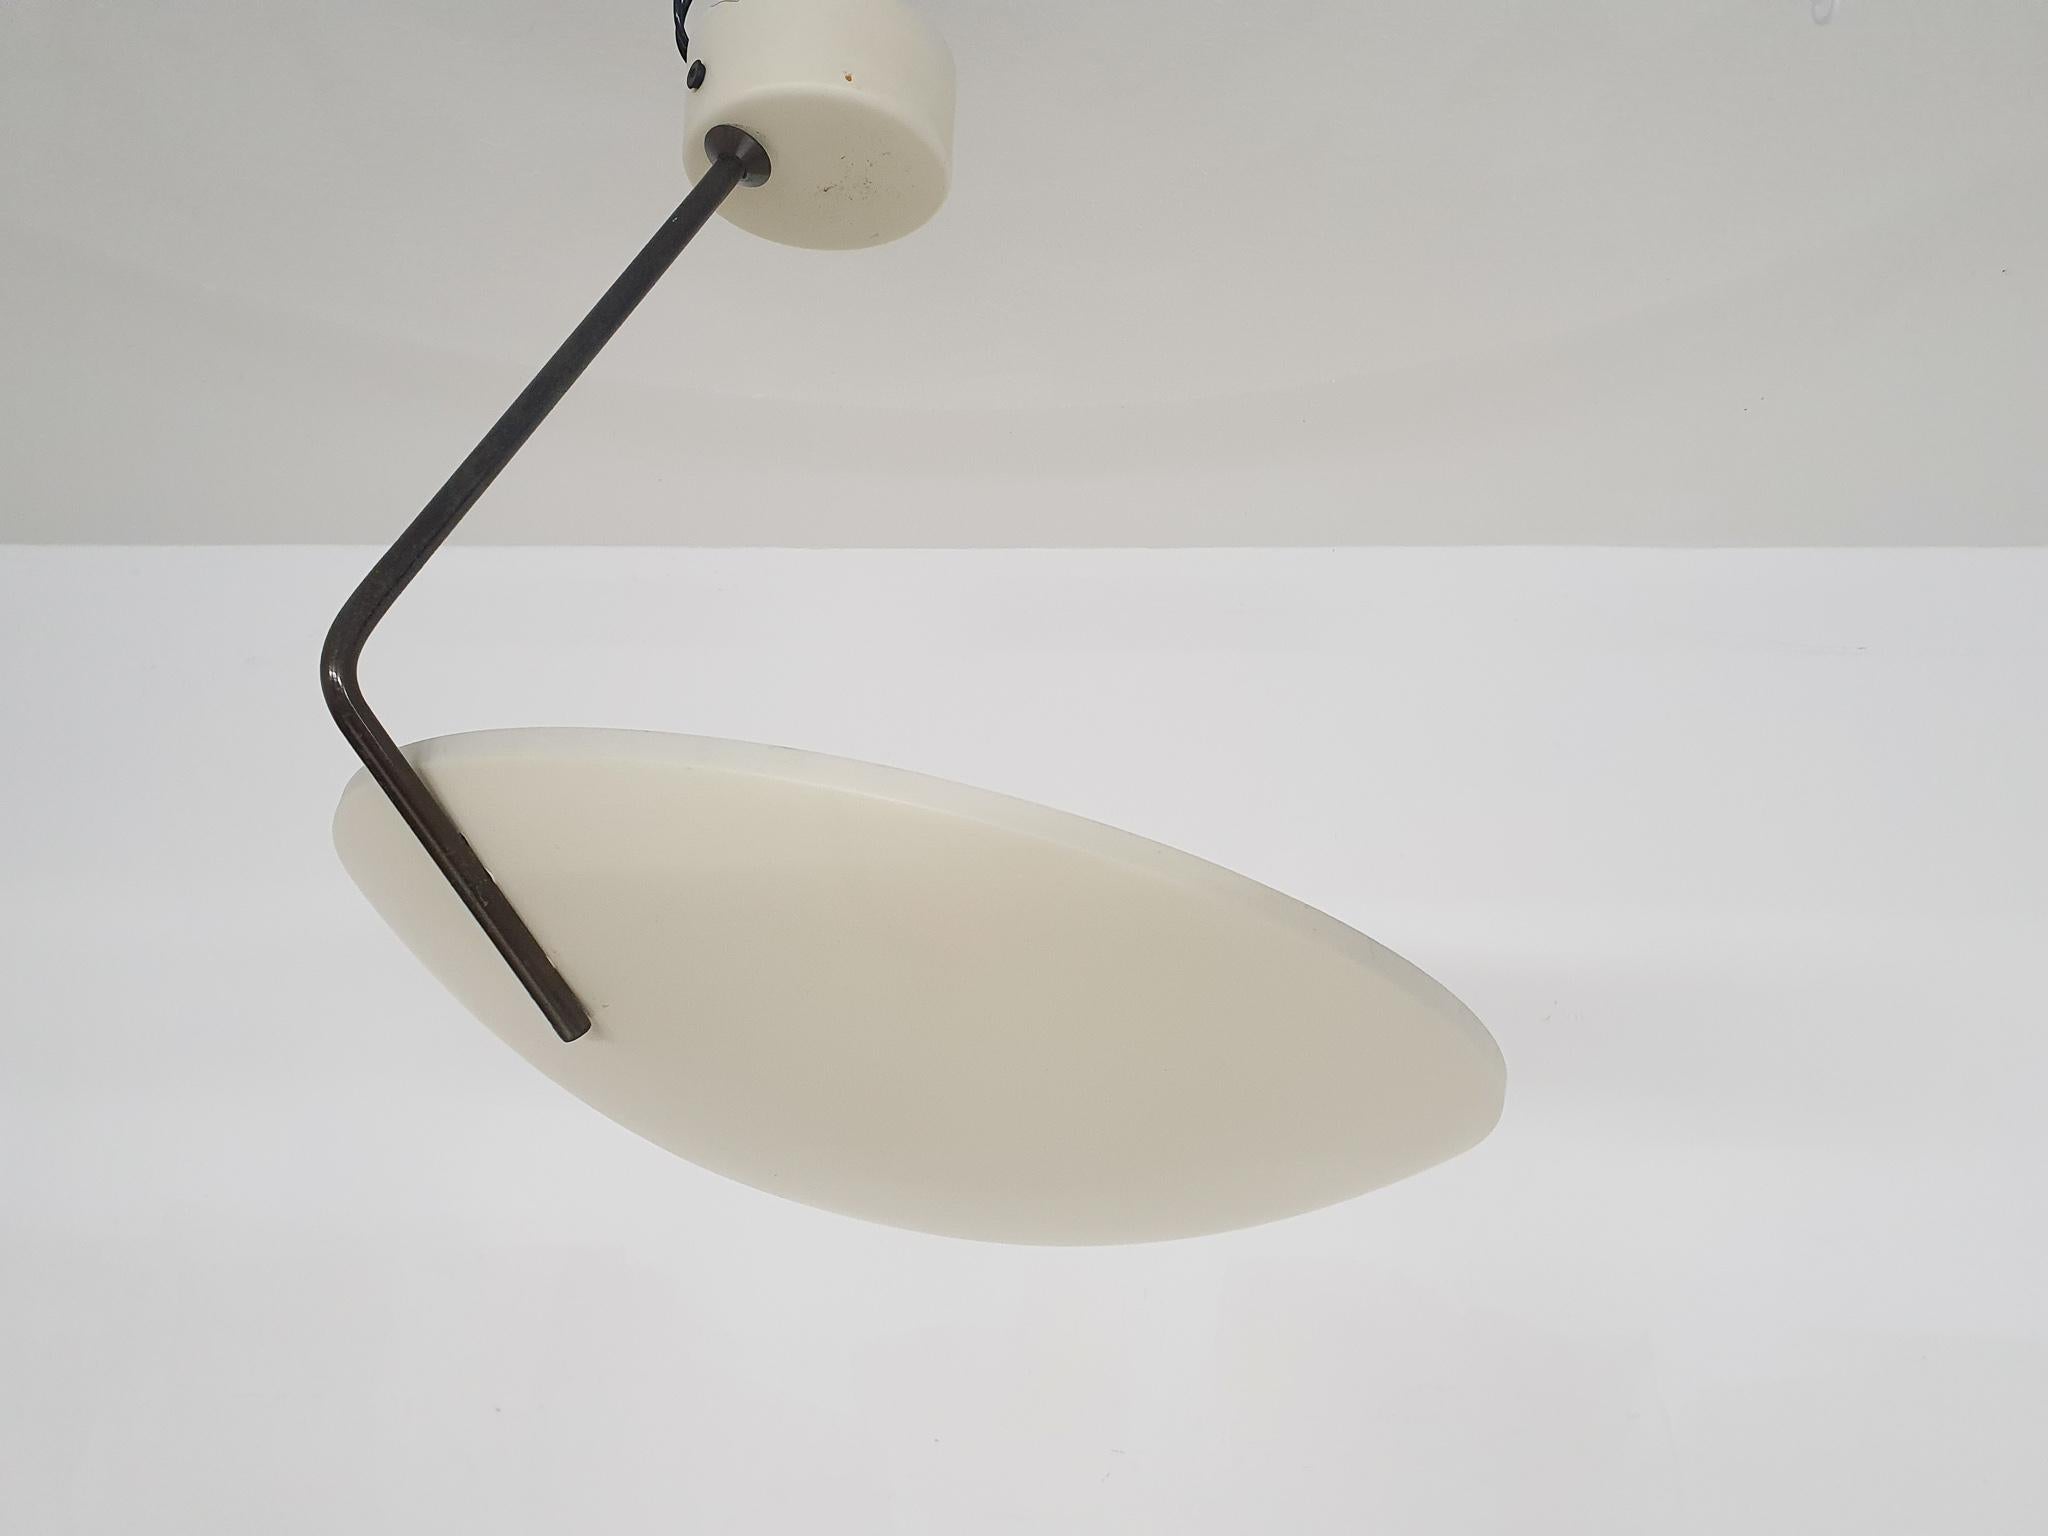 Off white metal wall or ceiling light by Bruno Gatta for Stilnovo, model 232.
In the book 